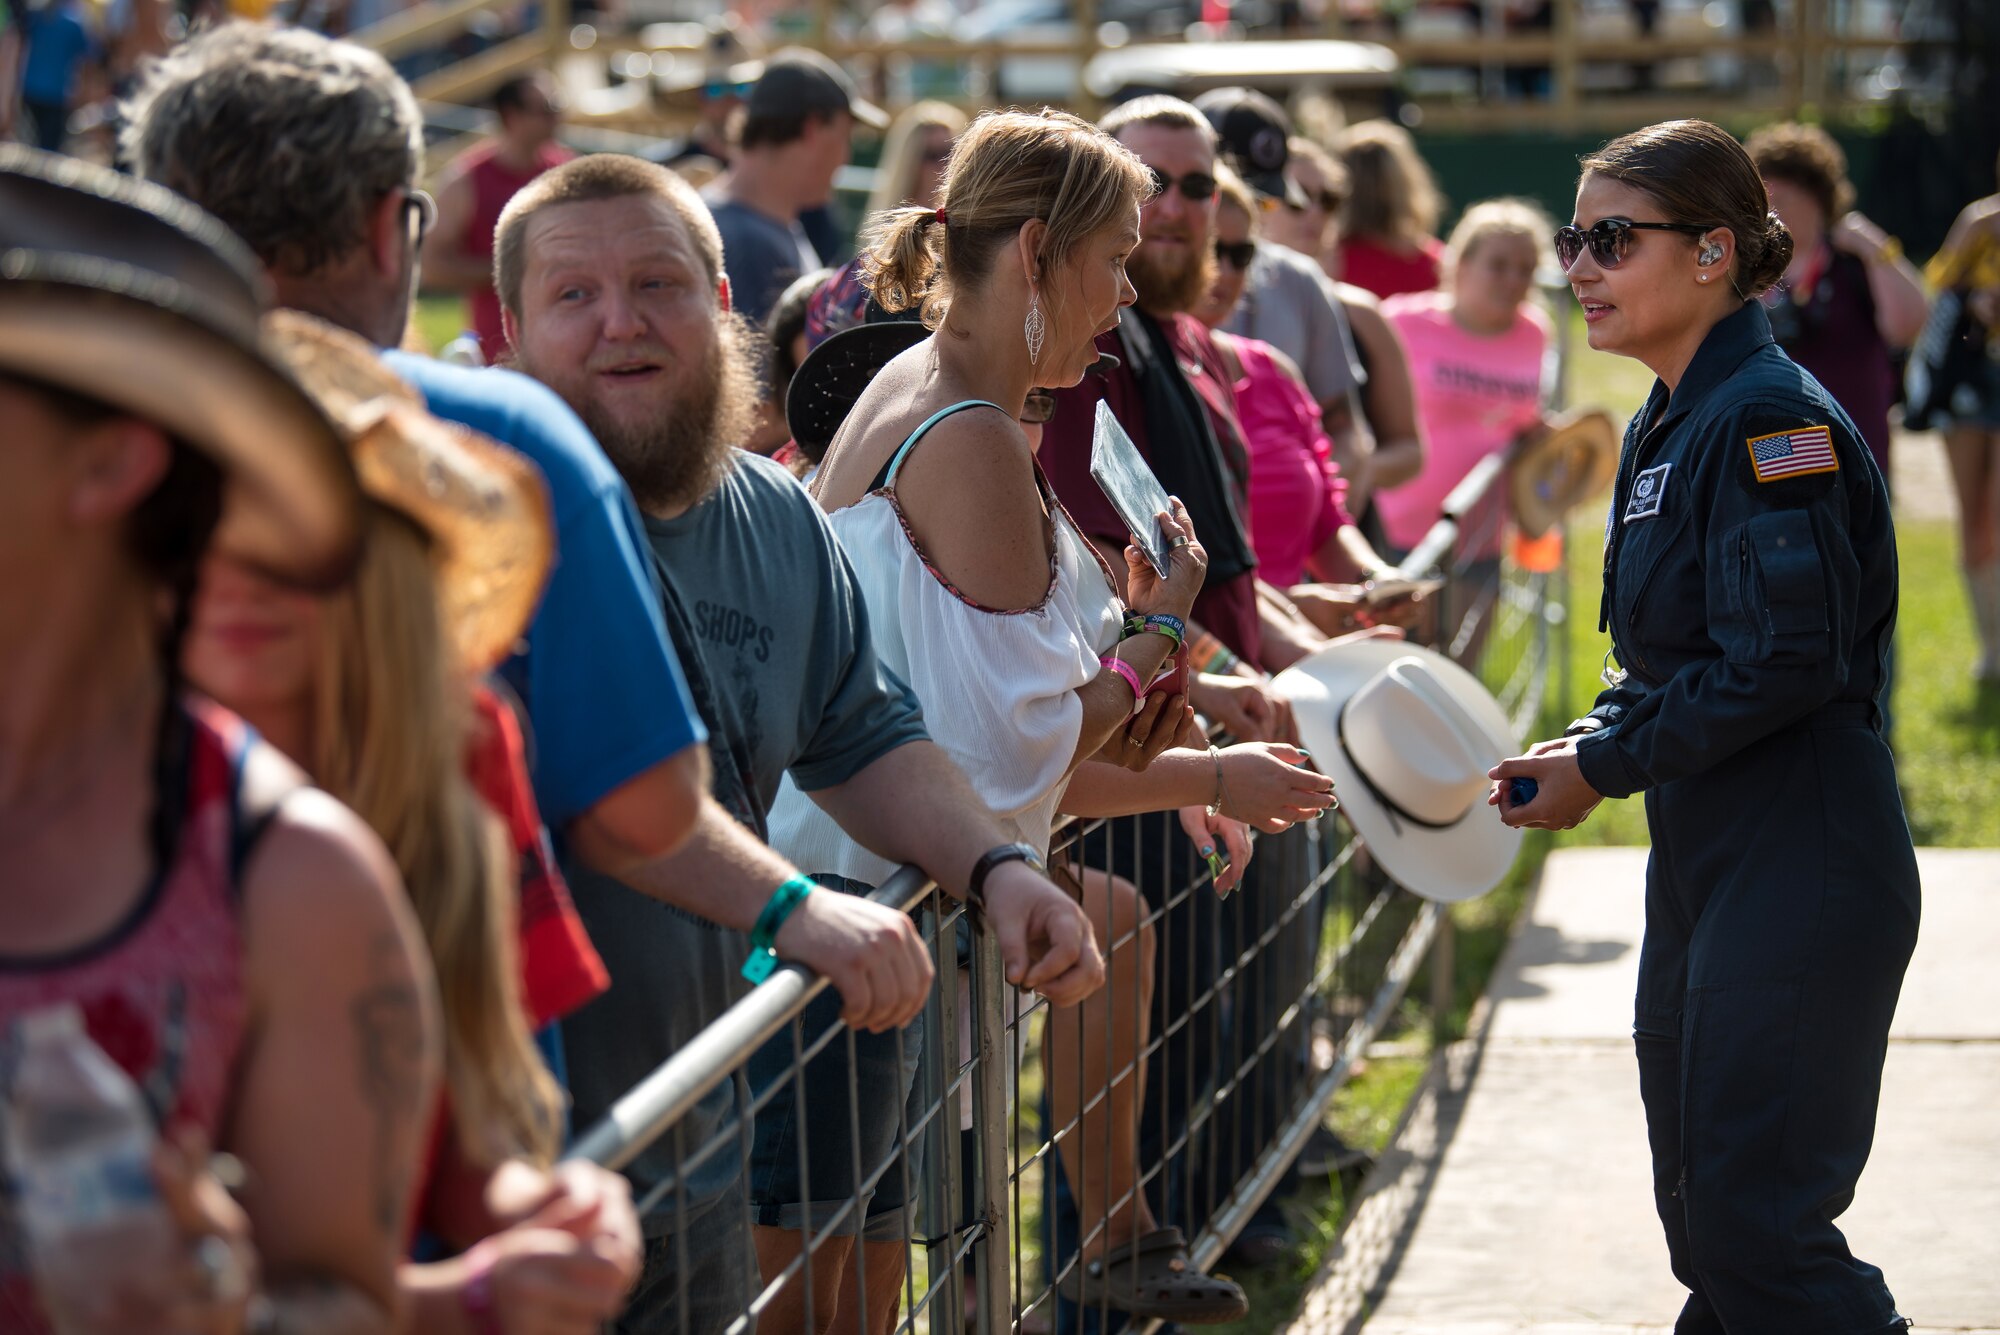 Lead vocalist for Max Impact, Technical Sgt. Nalani Quintello, visits with fans after performing for the Armed Forces Tribute at the 2019 Suwannee River Jam. This event took place at the Spirit of the Suwannee Music Park on Saturday, May 4, 2019.